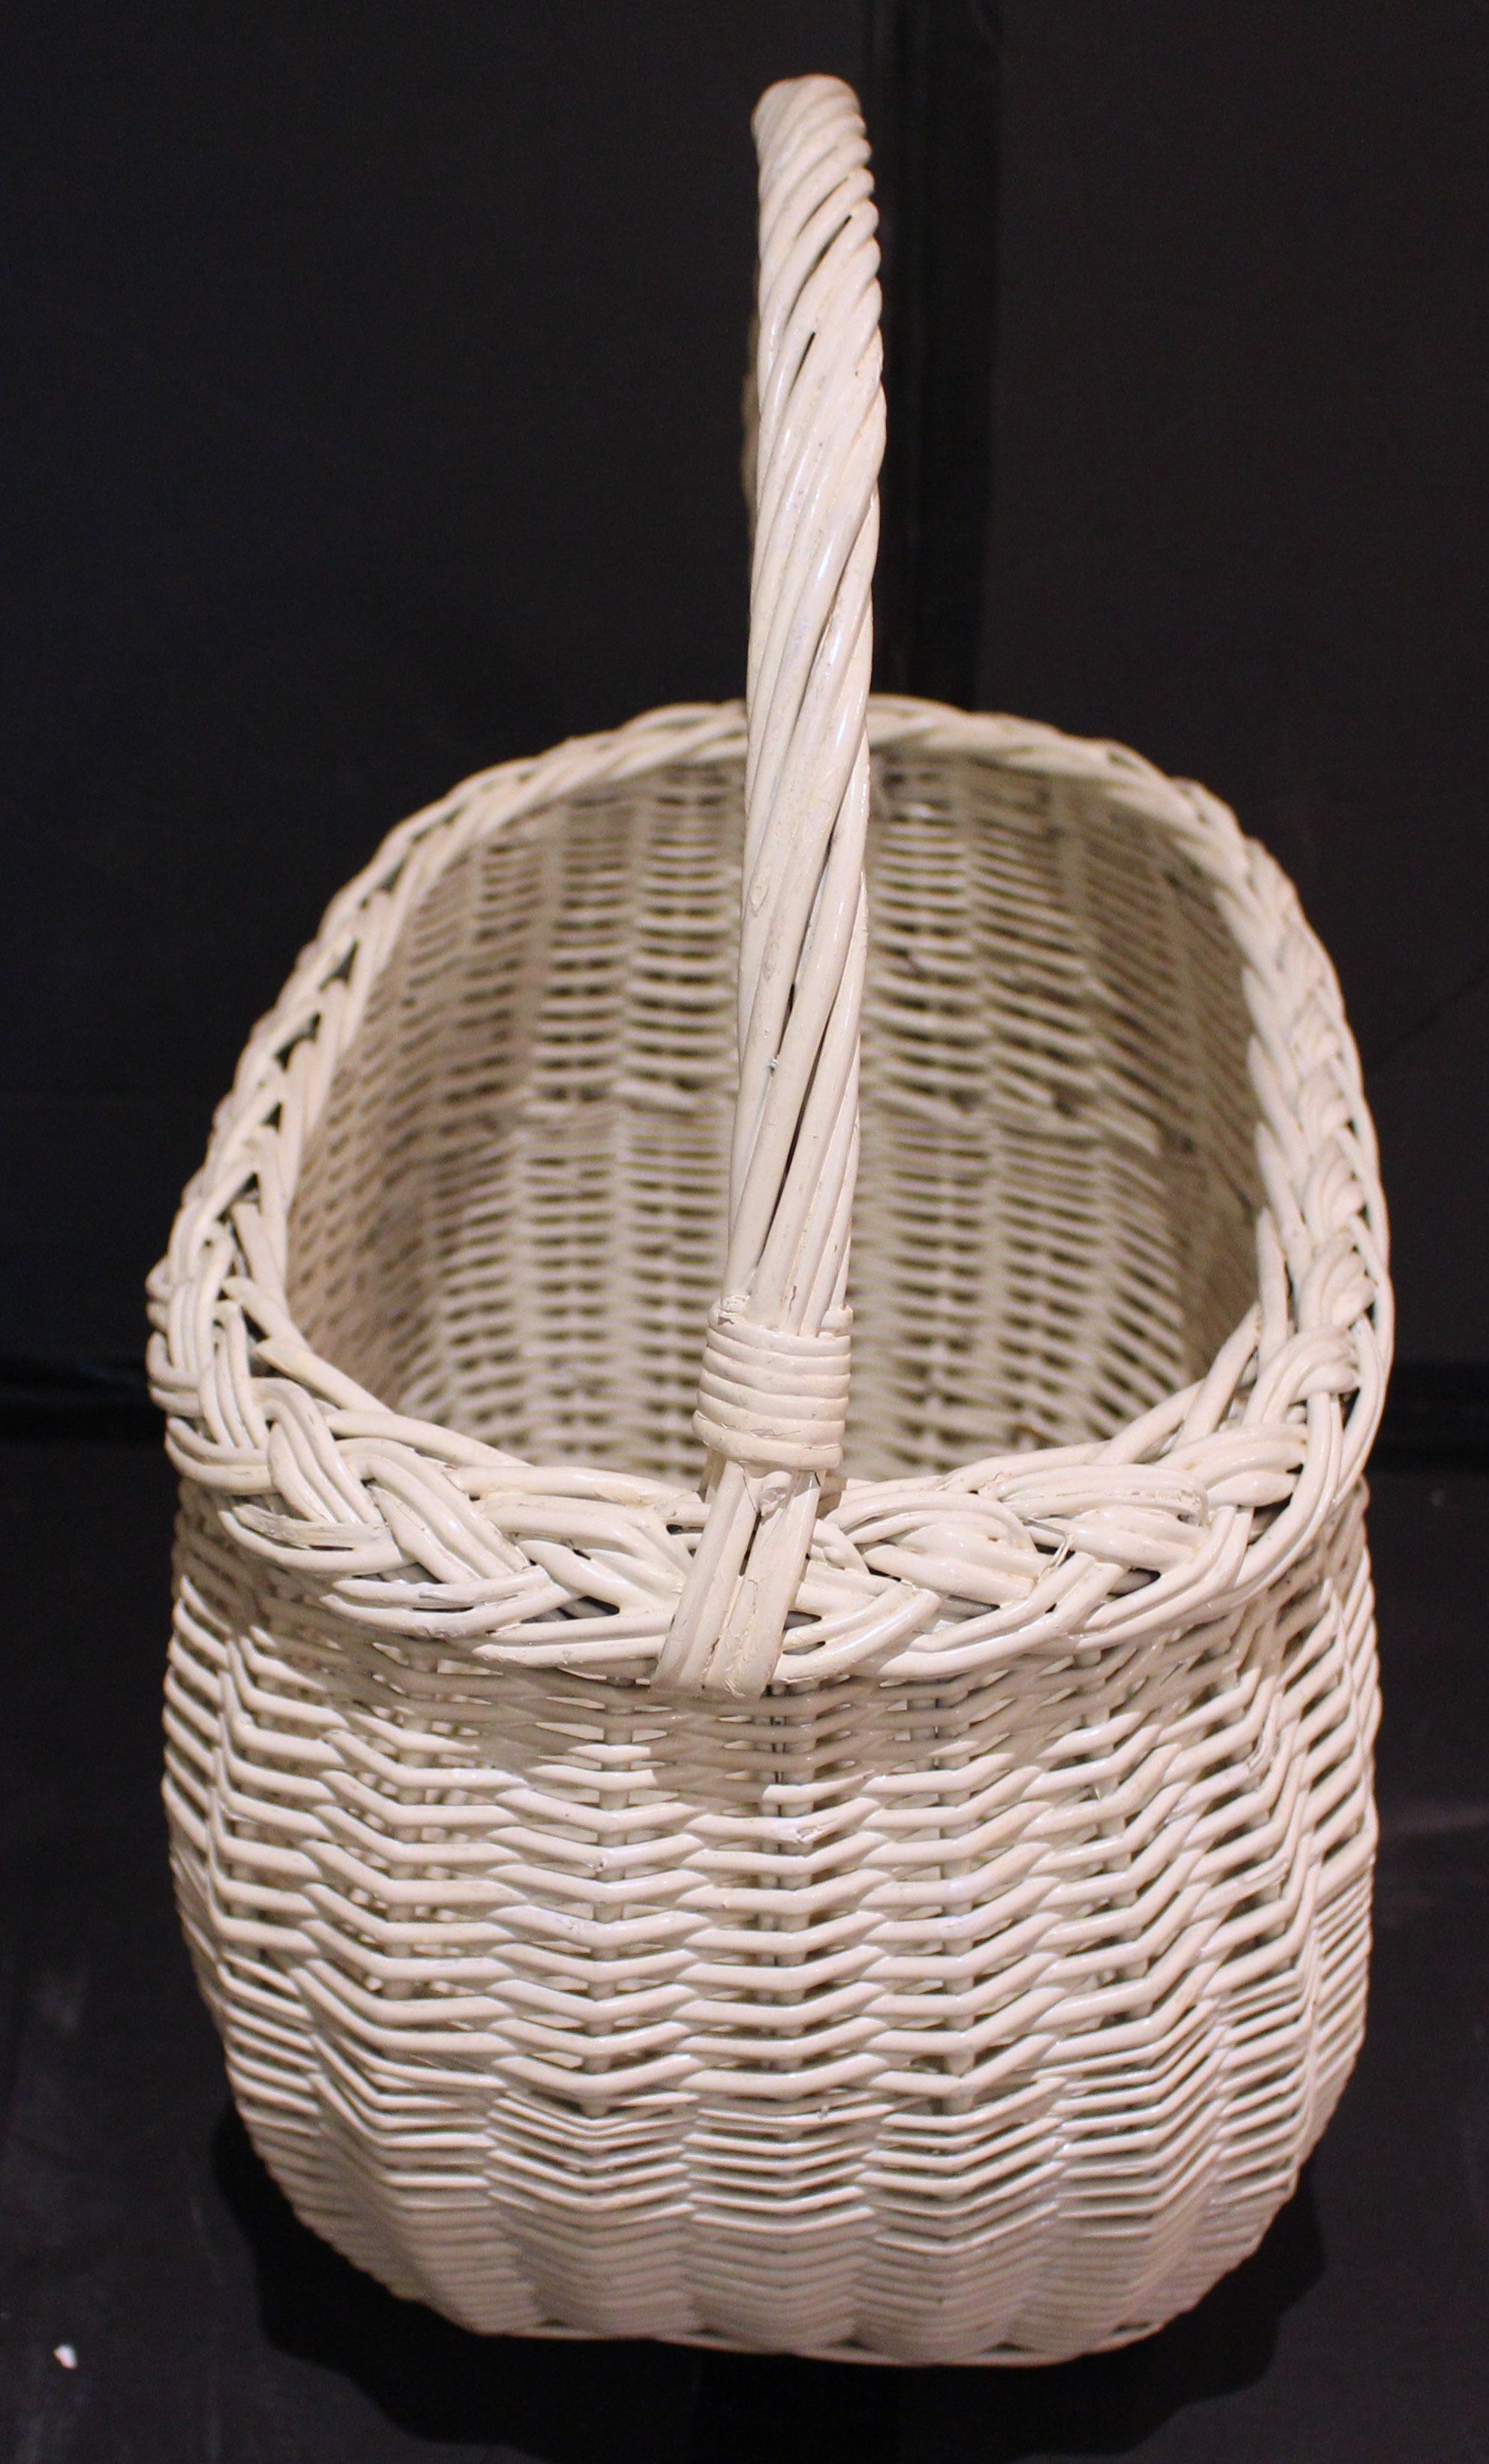 American Early 20th Century Wicker Handled Basket, New England